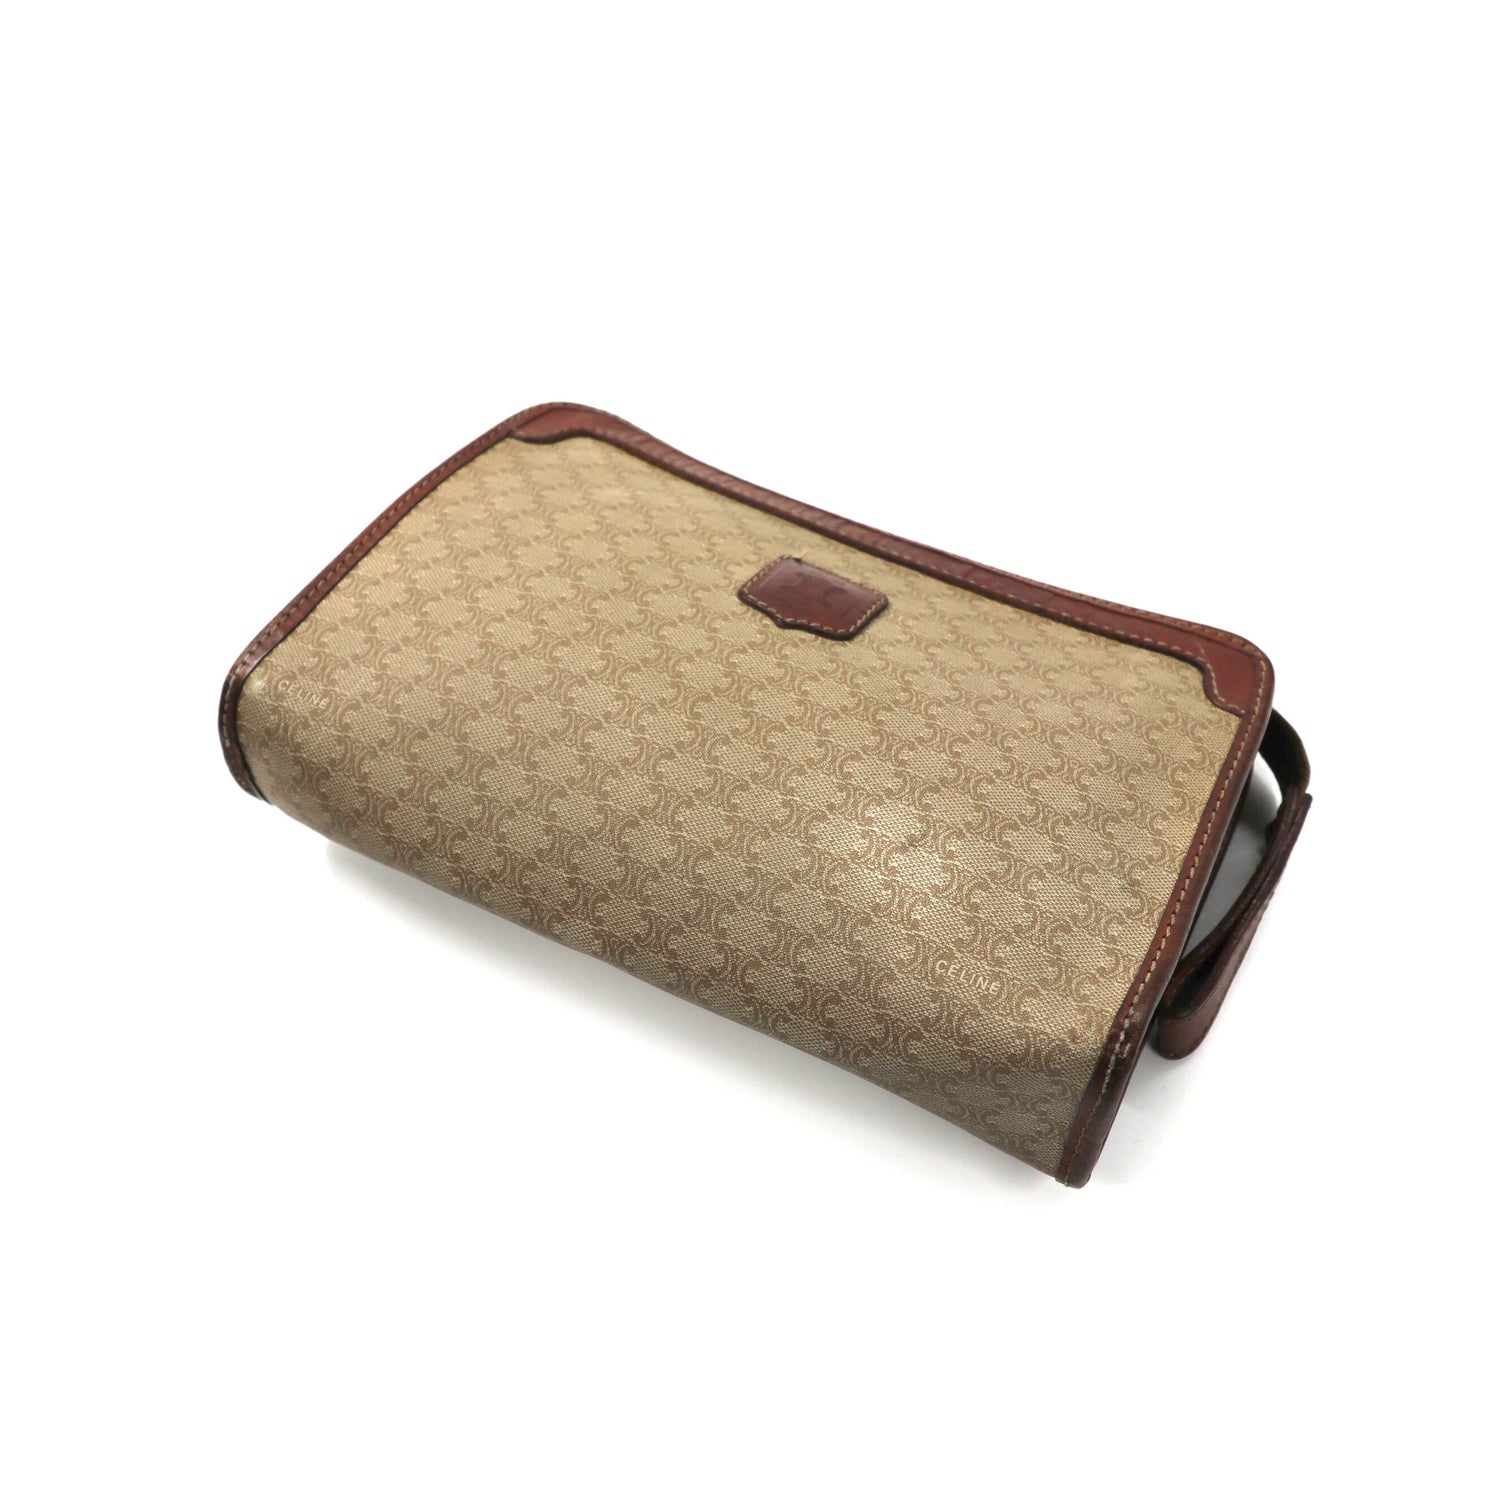 CELINE Clutch Bag Beige Leather Macadam Pattern M06 Made in Italy 